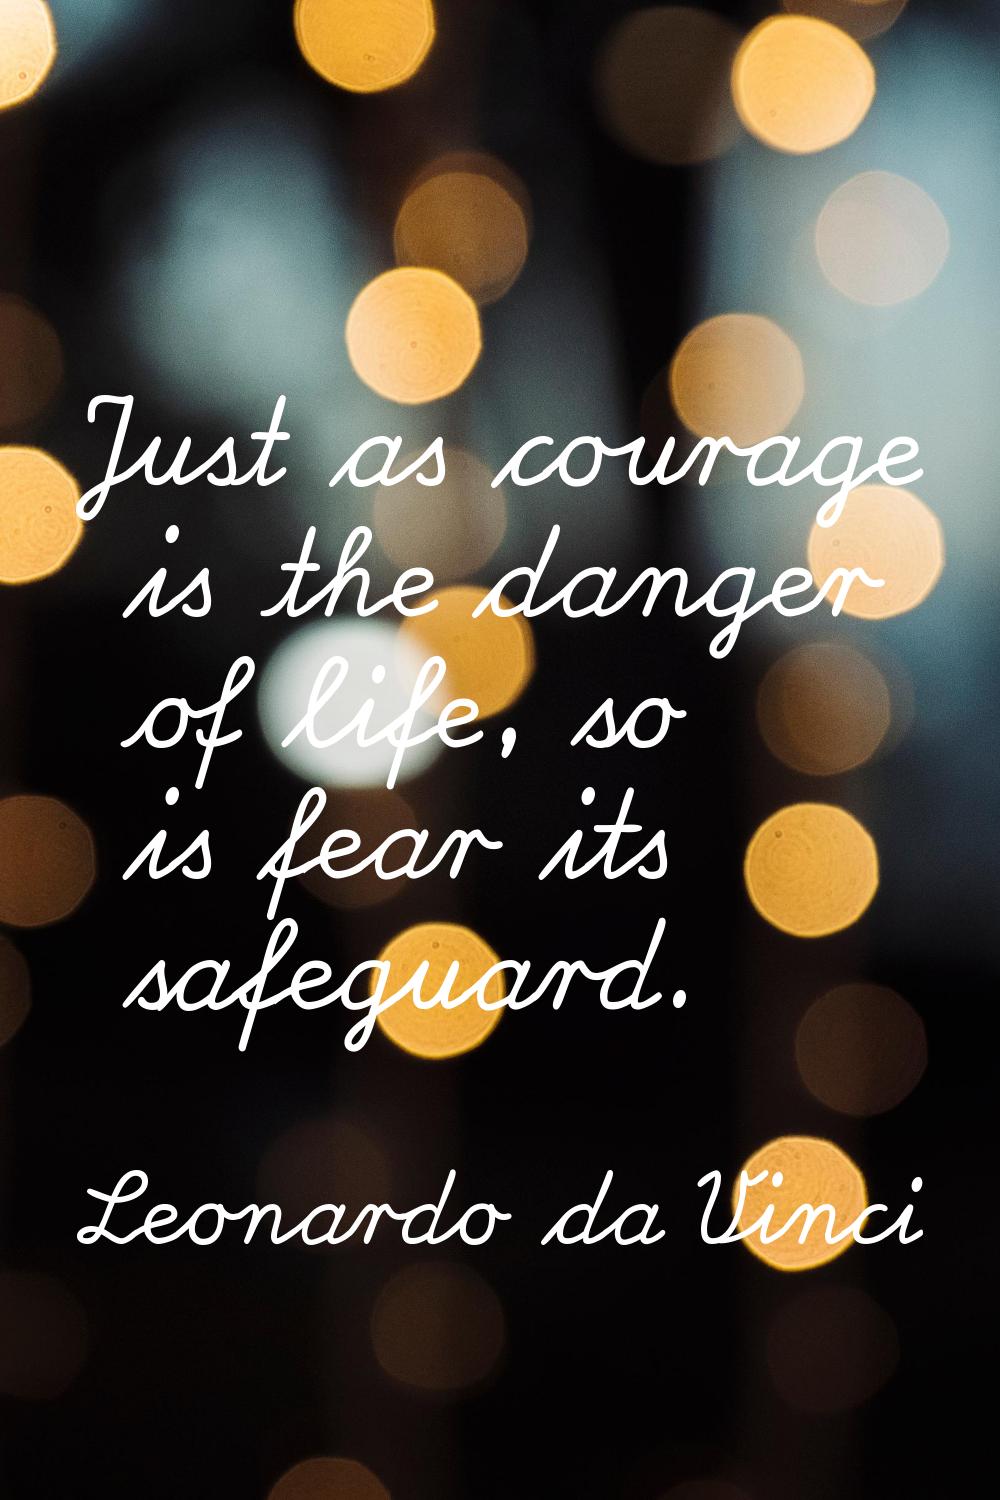 Just as courage is the danger of life, so is fear its safeguard.